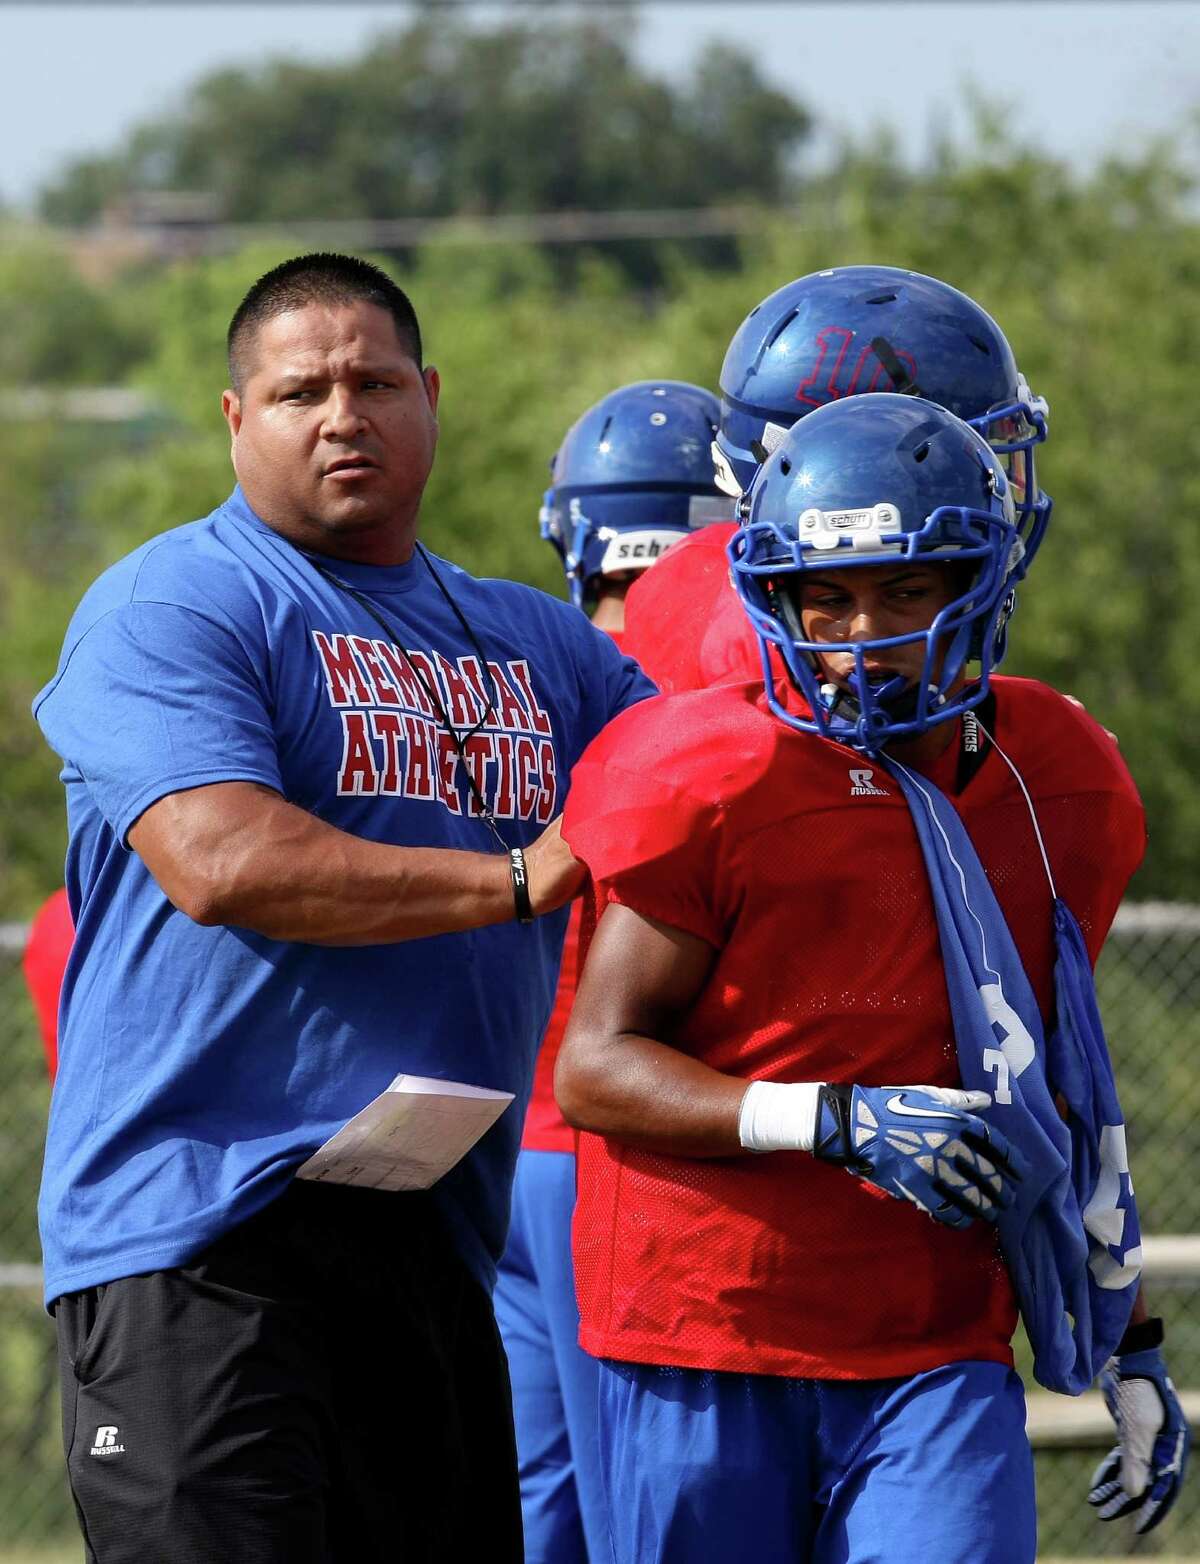 Memorial High School got its first on-field football victory since 2010 on Friday in a win against Pearsall. Head Coach Alex Guerra works with the team during practice on Thursday Sept. 5, 2013.